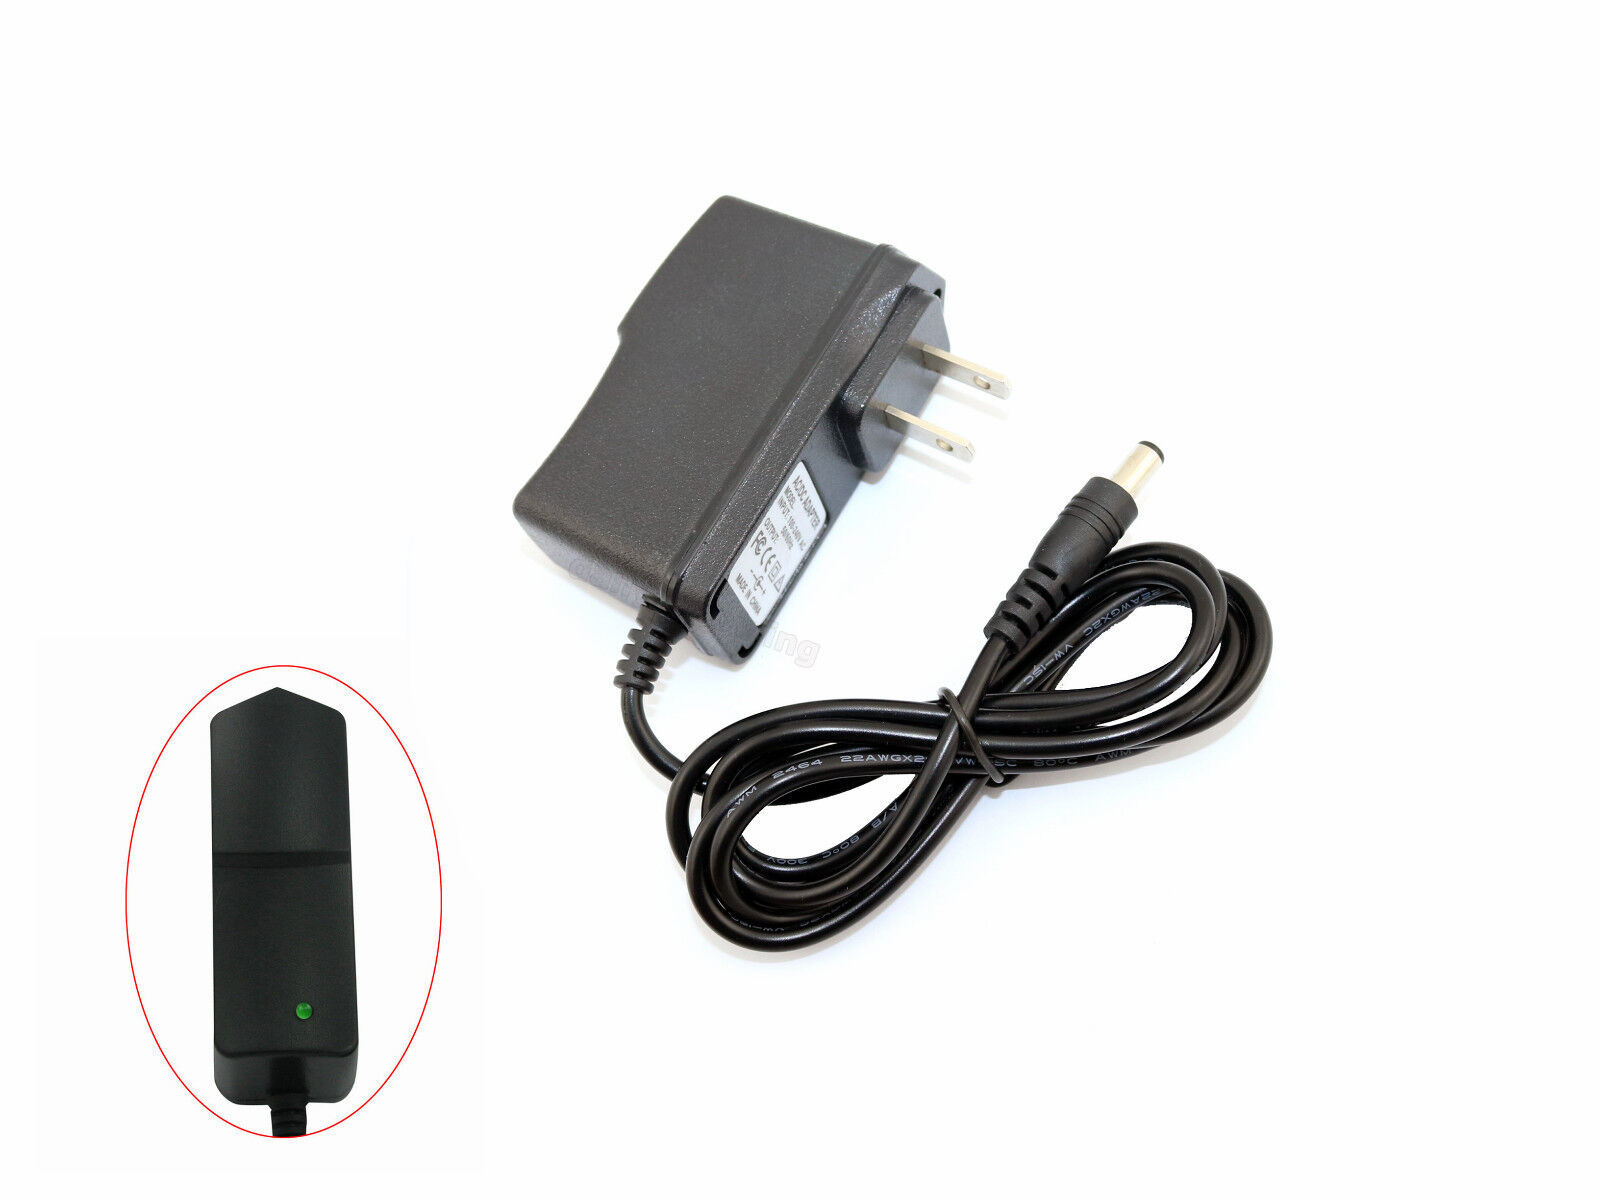 Primary image for Ac100V-240V Converter Adapter Power Supply 5.5Mm X 2.1Mm Series 6Vdc 1.5A